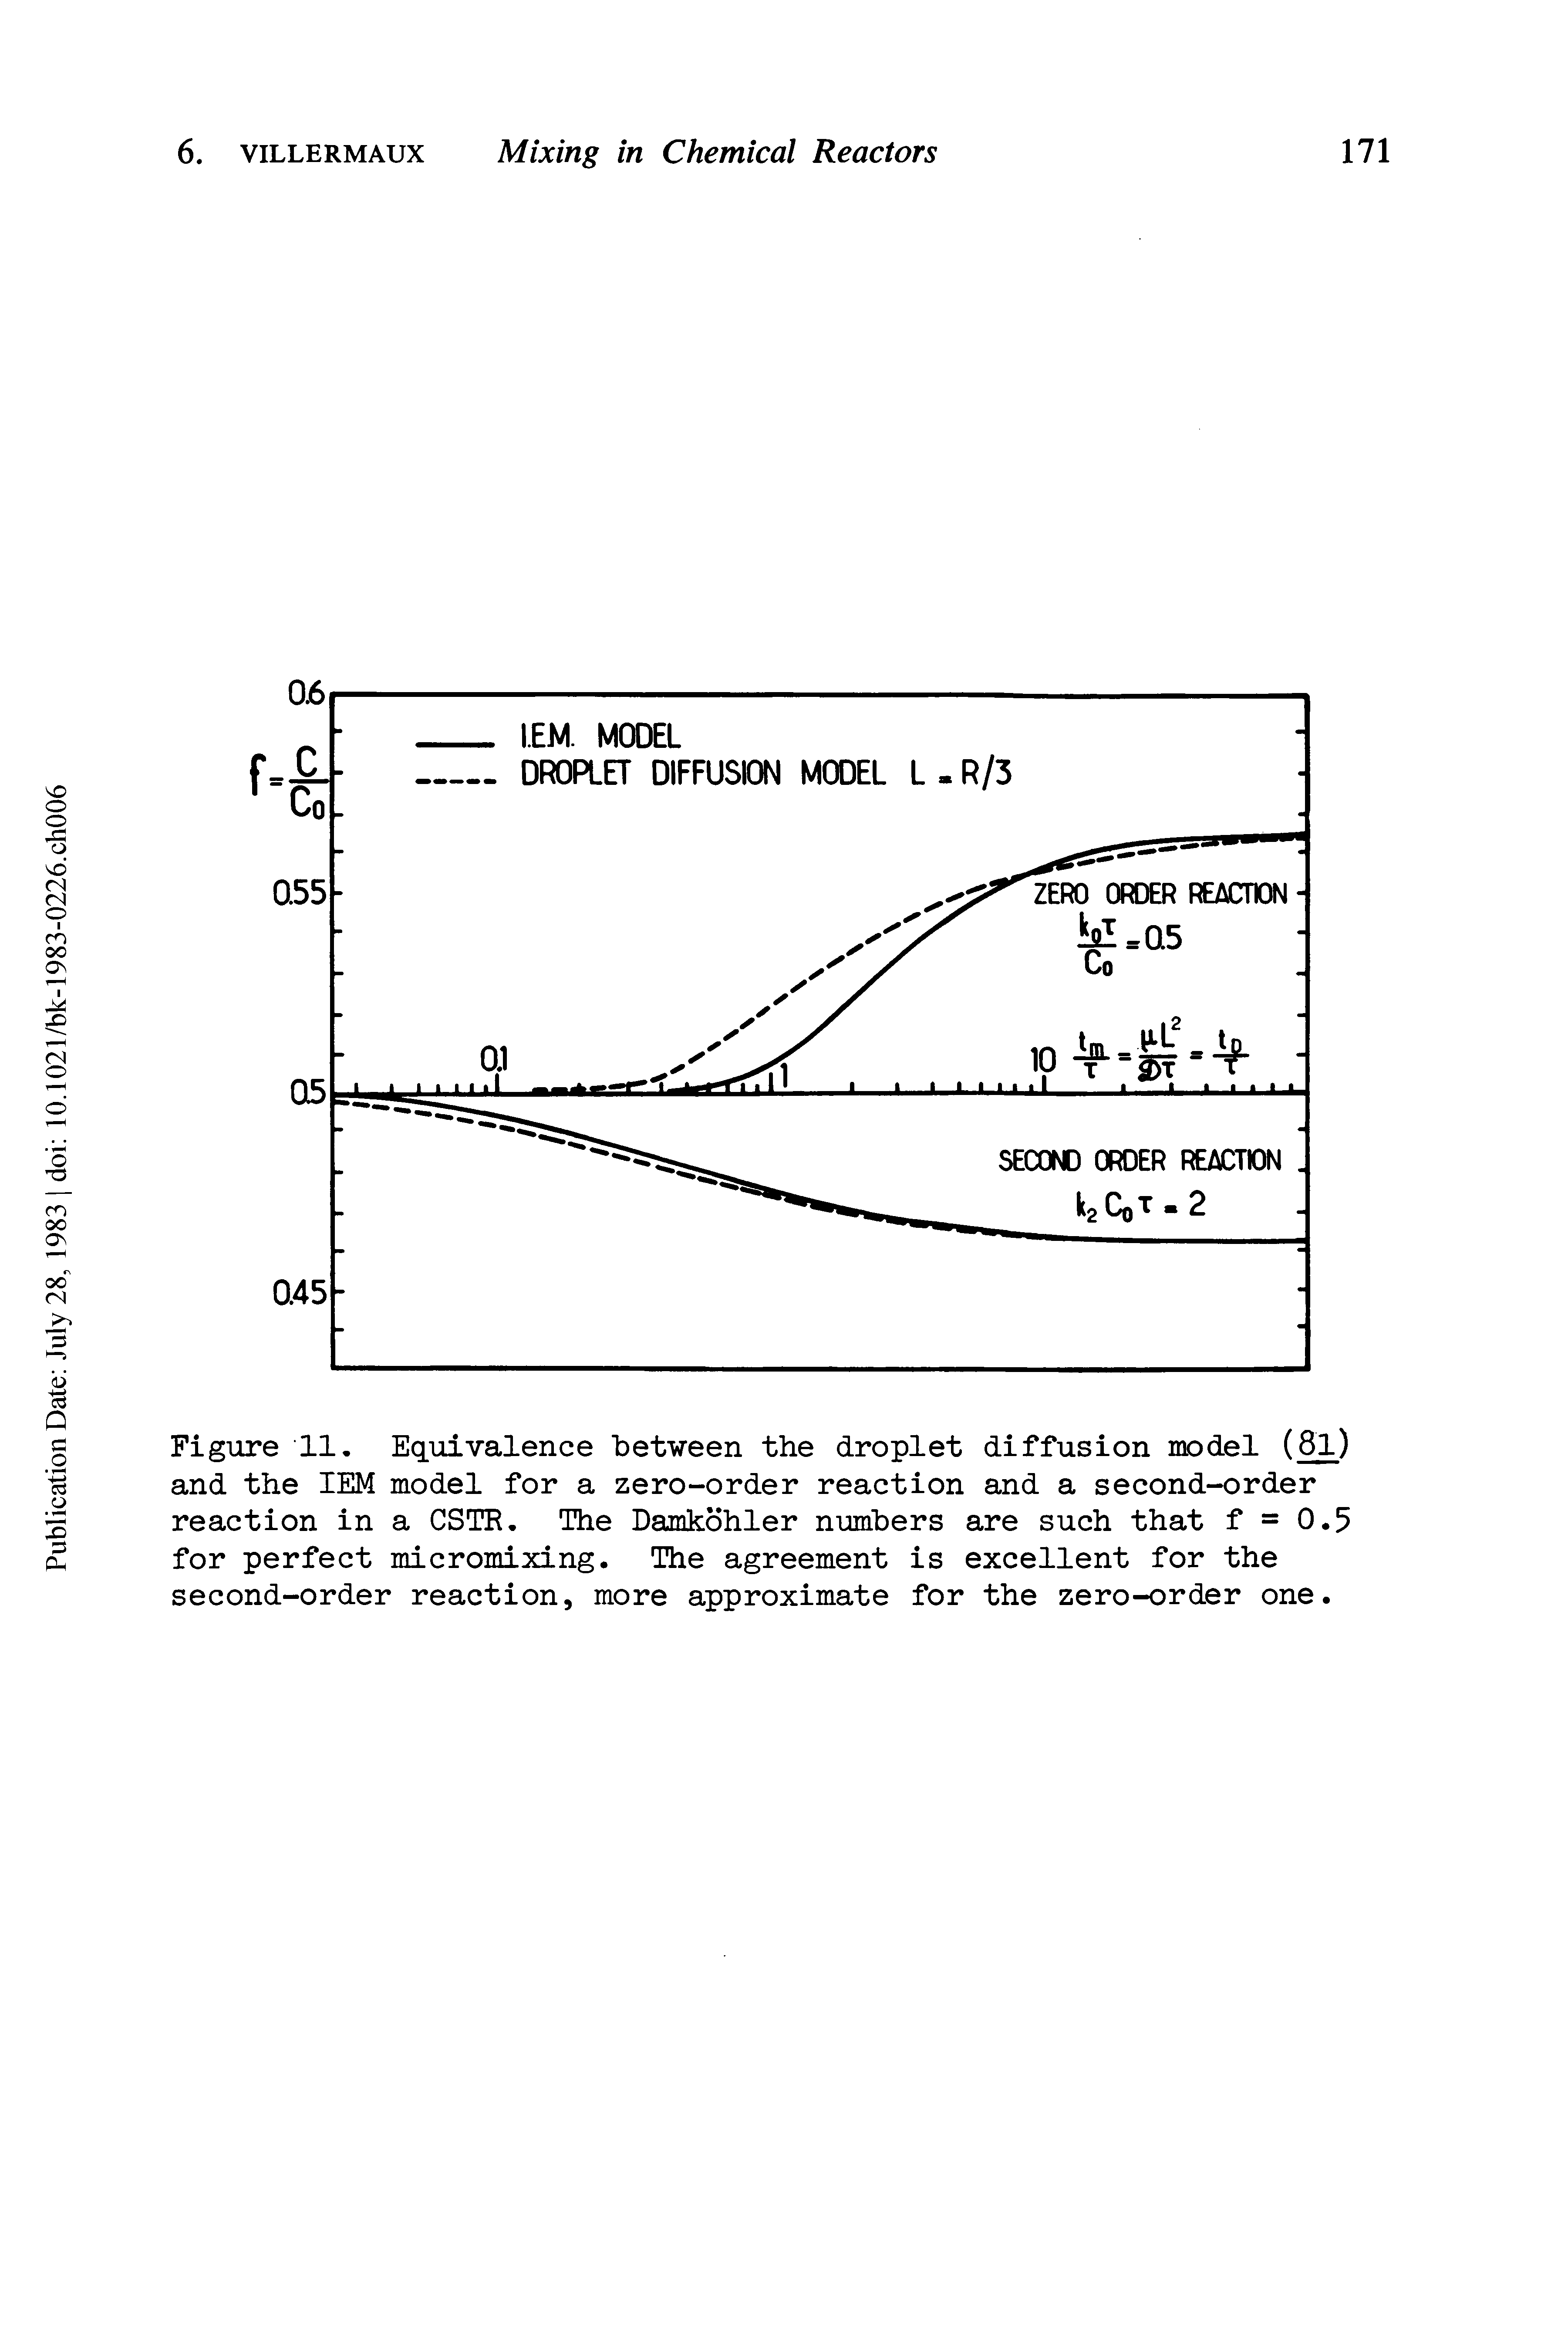 Figure 11. Equivalence between the droplet diffusion model (81) and the IEM model for a zero-order reaction and a second-order reaction in a CSTR. The Damkohler numbers are such that f = 0.5 for perfect micromixing. The agreement is excellent for the second-order reaction, more approximate for the zero-order one.